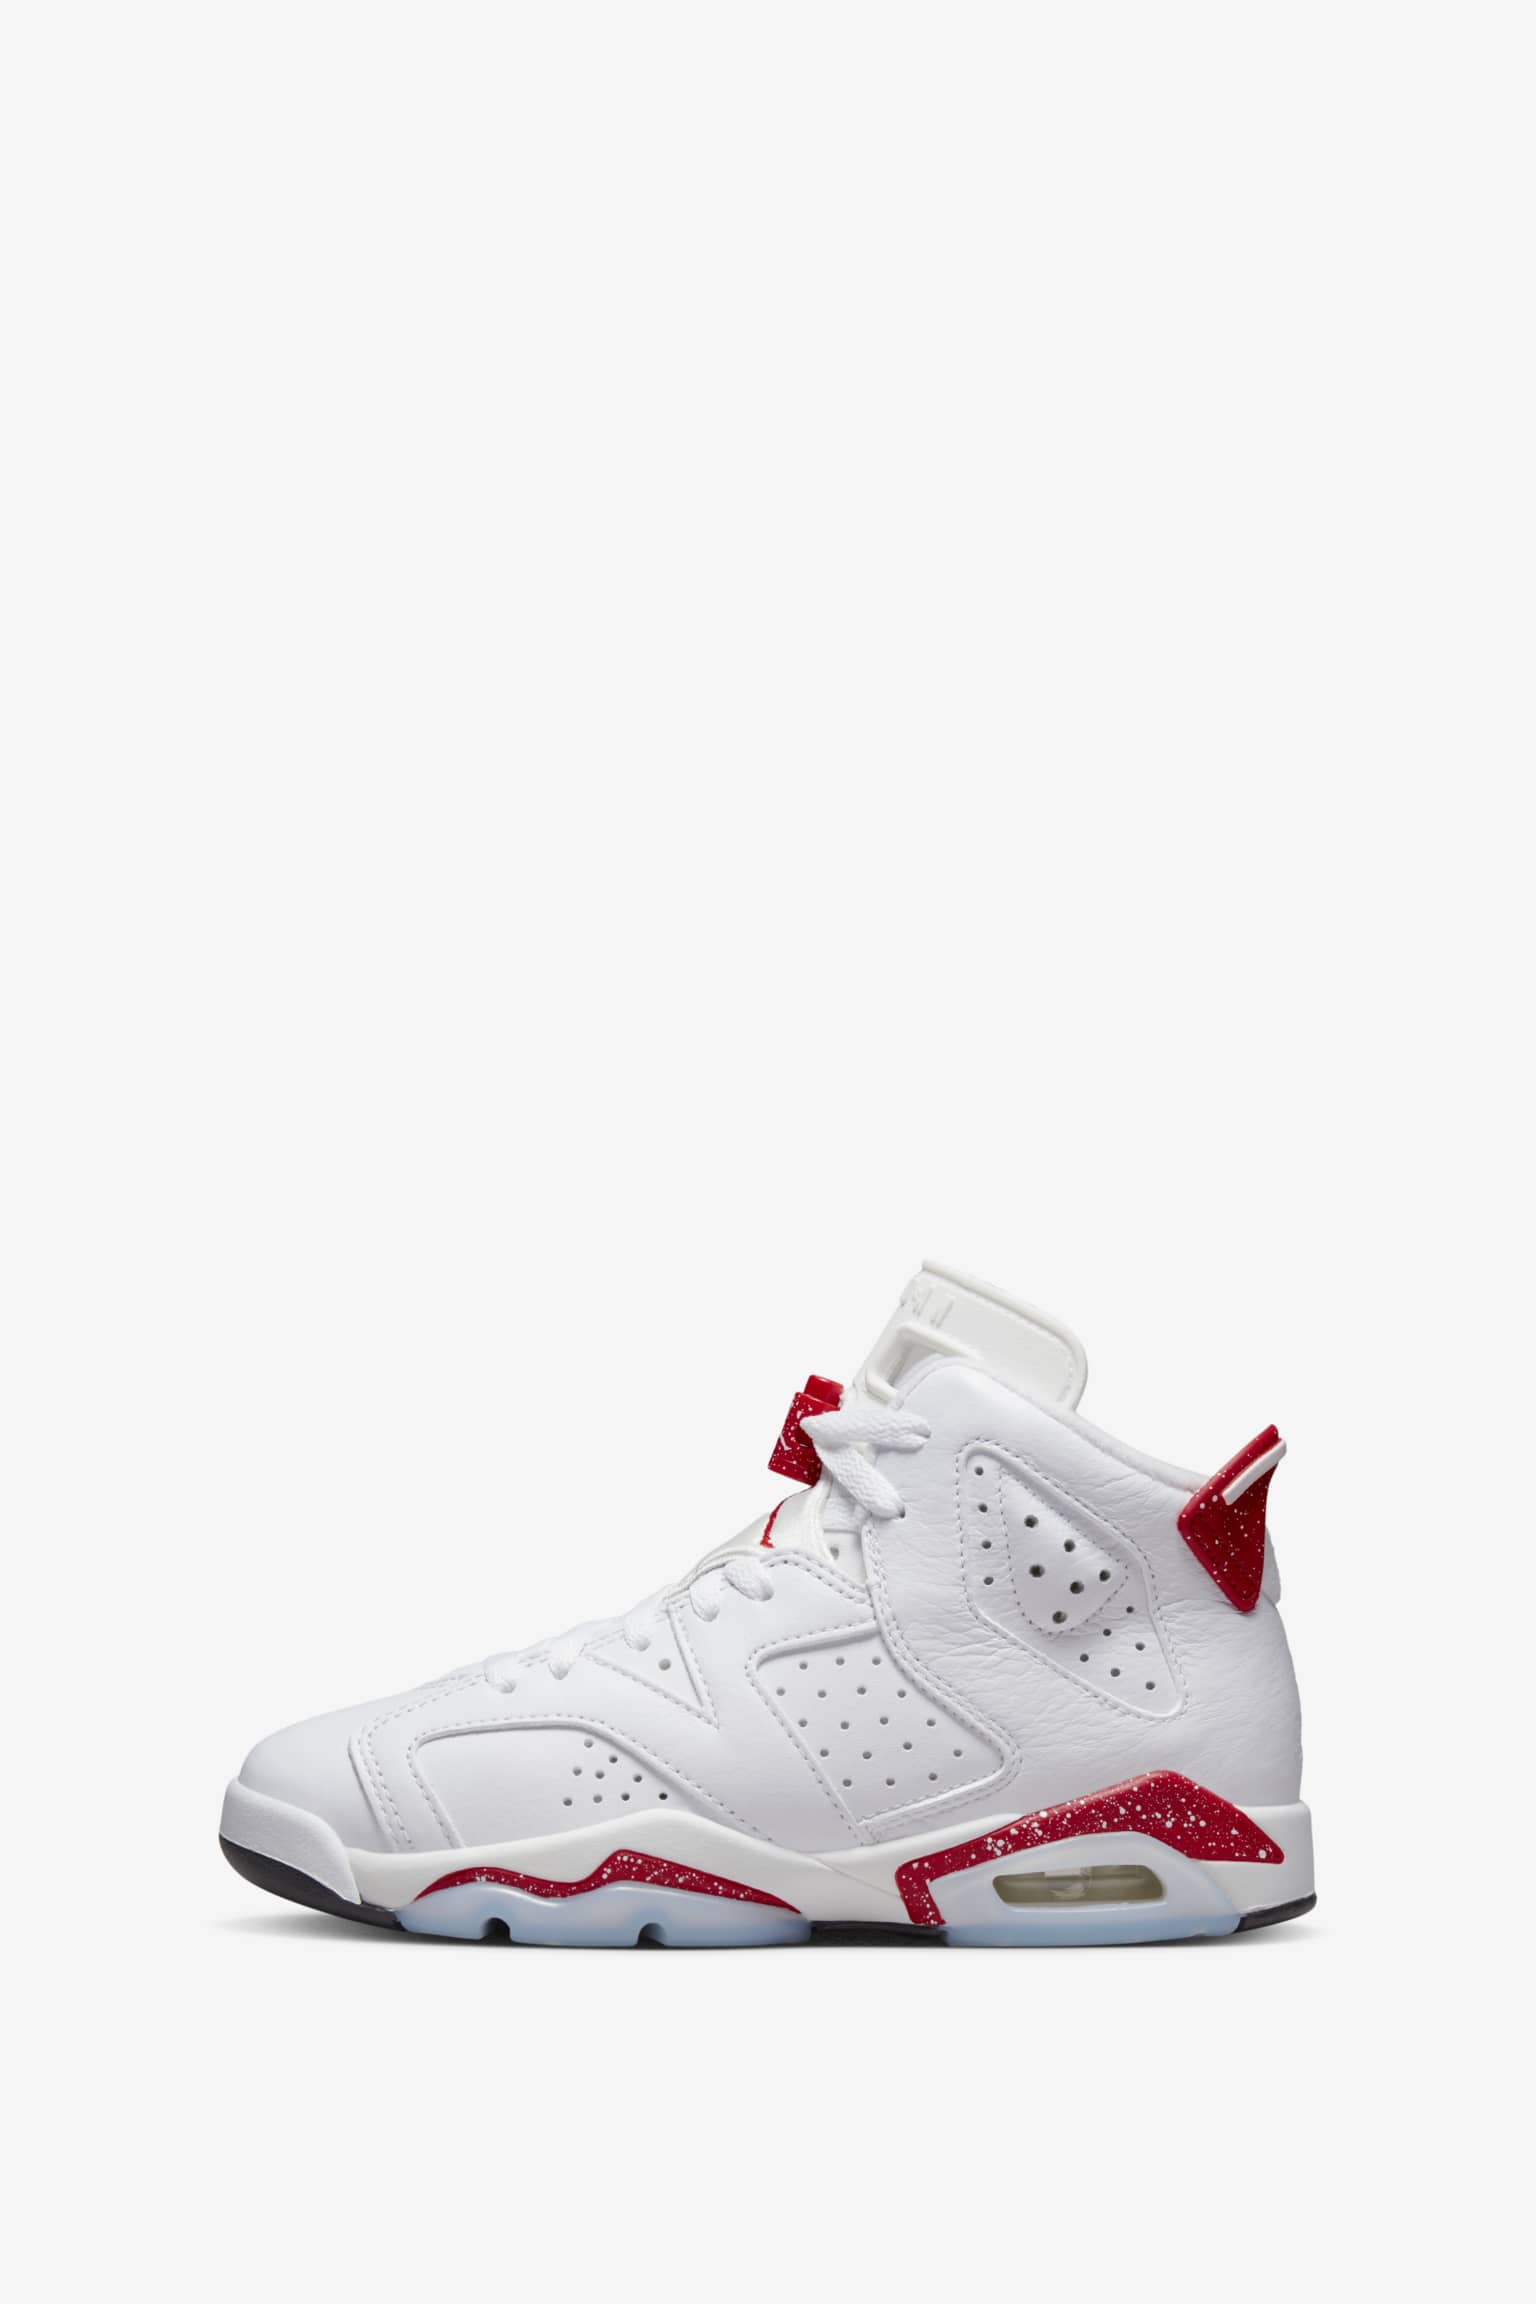 jordan 6 white and red